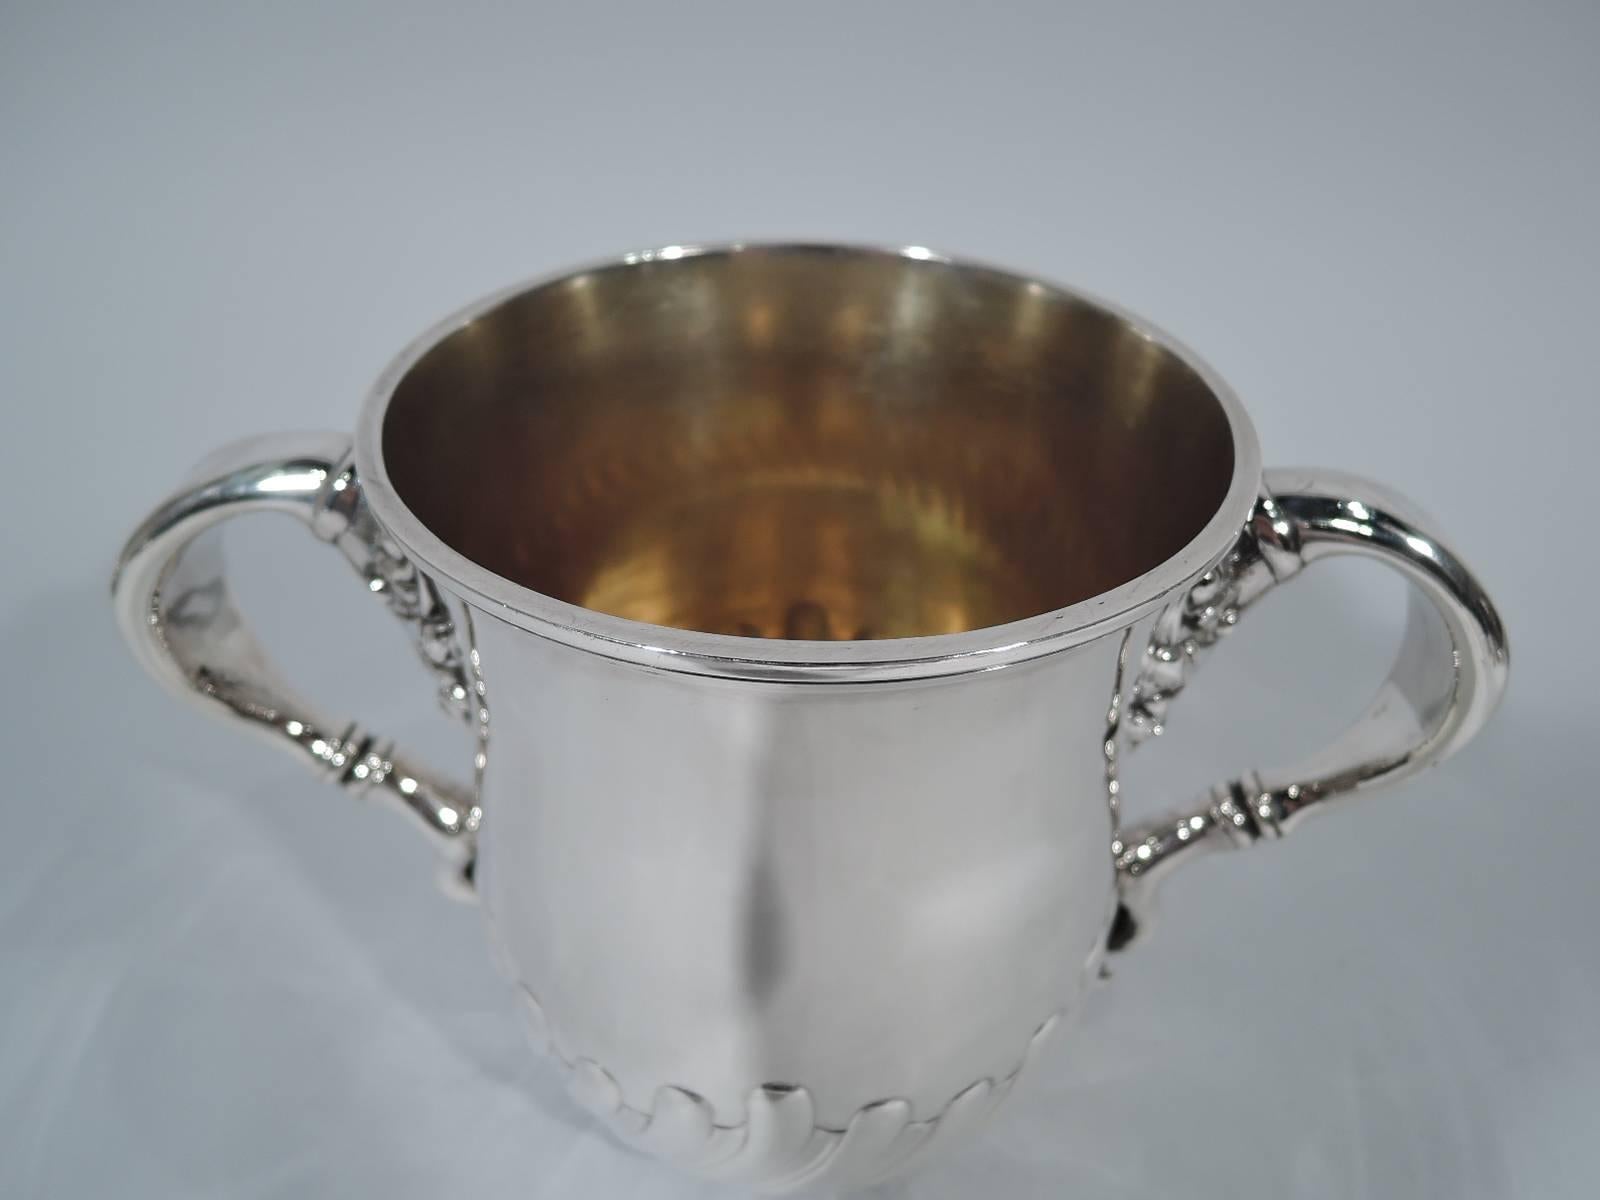 Sterling silver trophy cup. Made by Bigelow, Kennard & Company Inc. in Boston, circa 1900. Urn with scroll-mounted scroll handles and twisted fluting at base. Gilt interior. Traditional and substantial with room for engraving. Hallmarked. Heavy